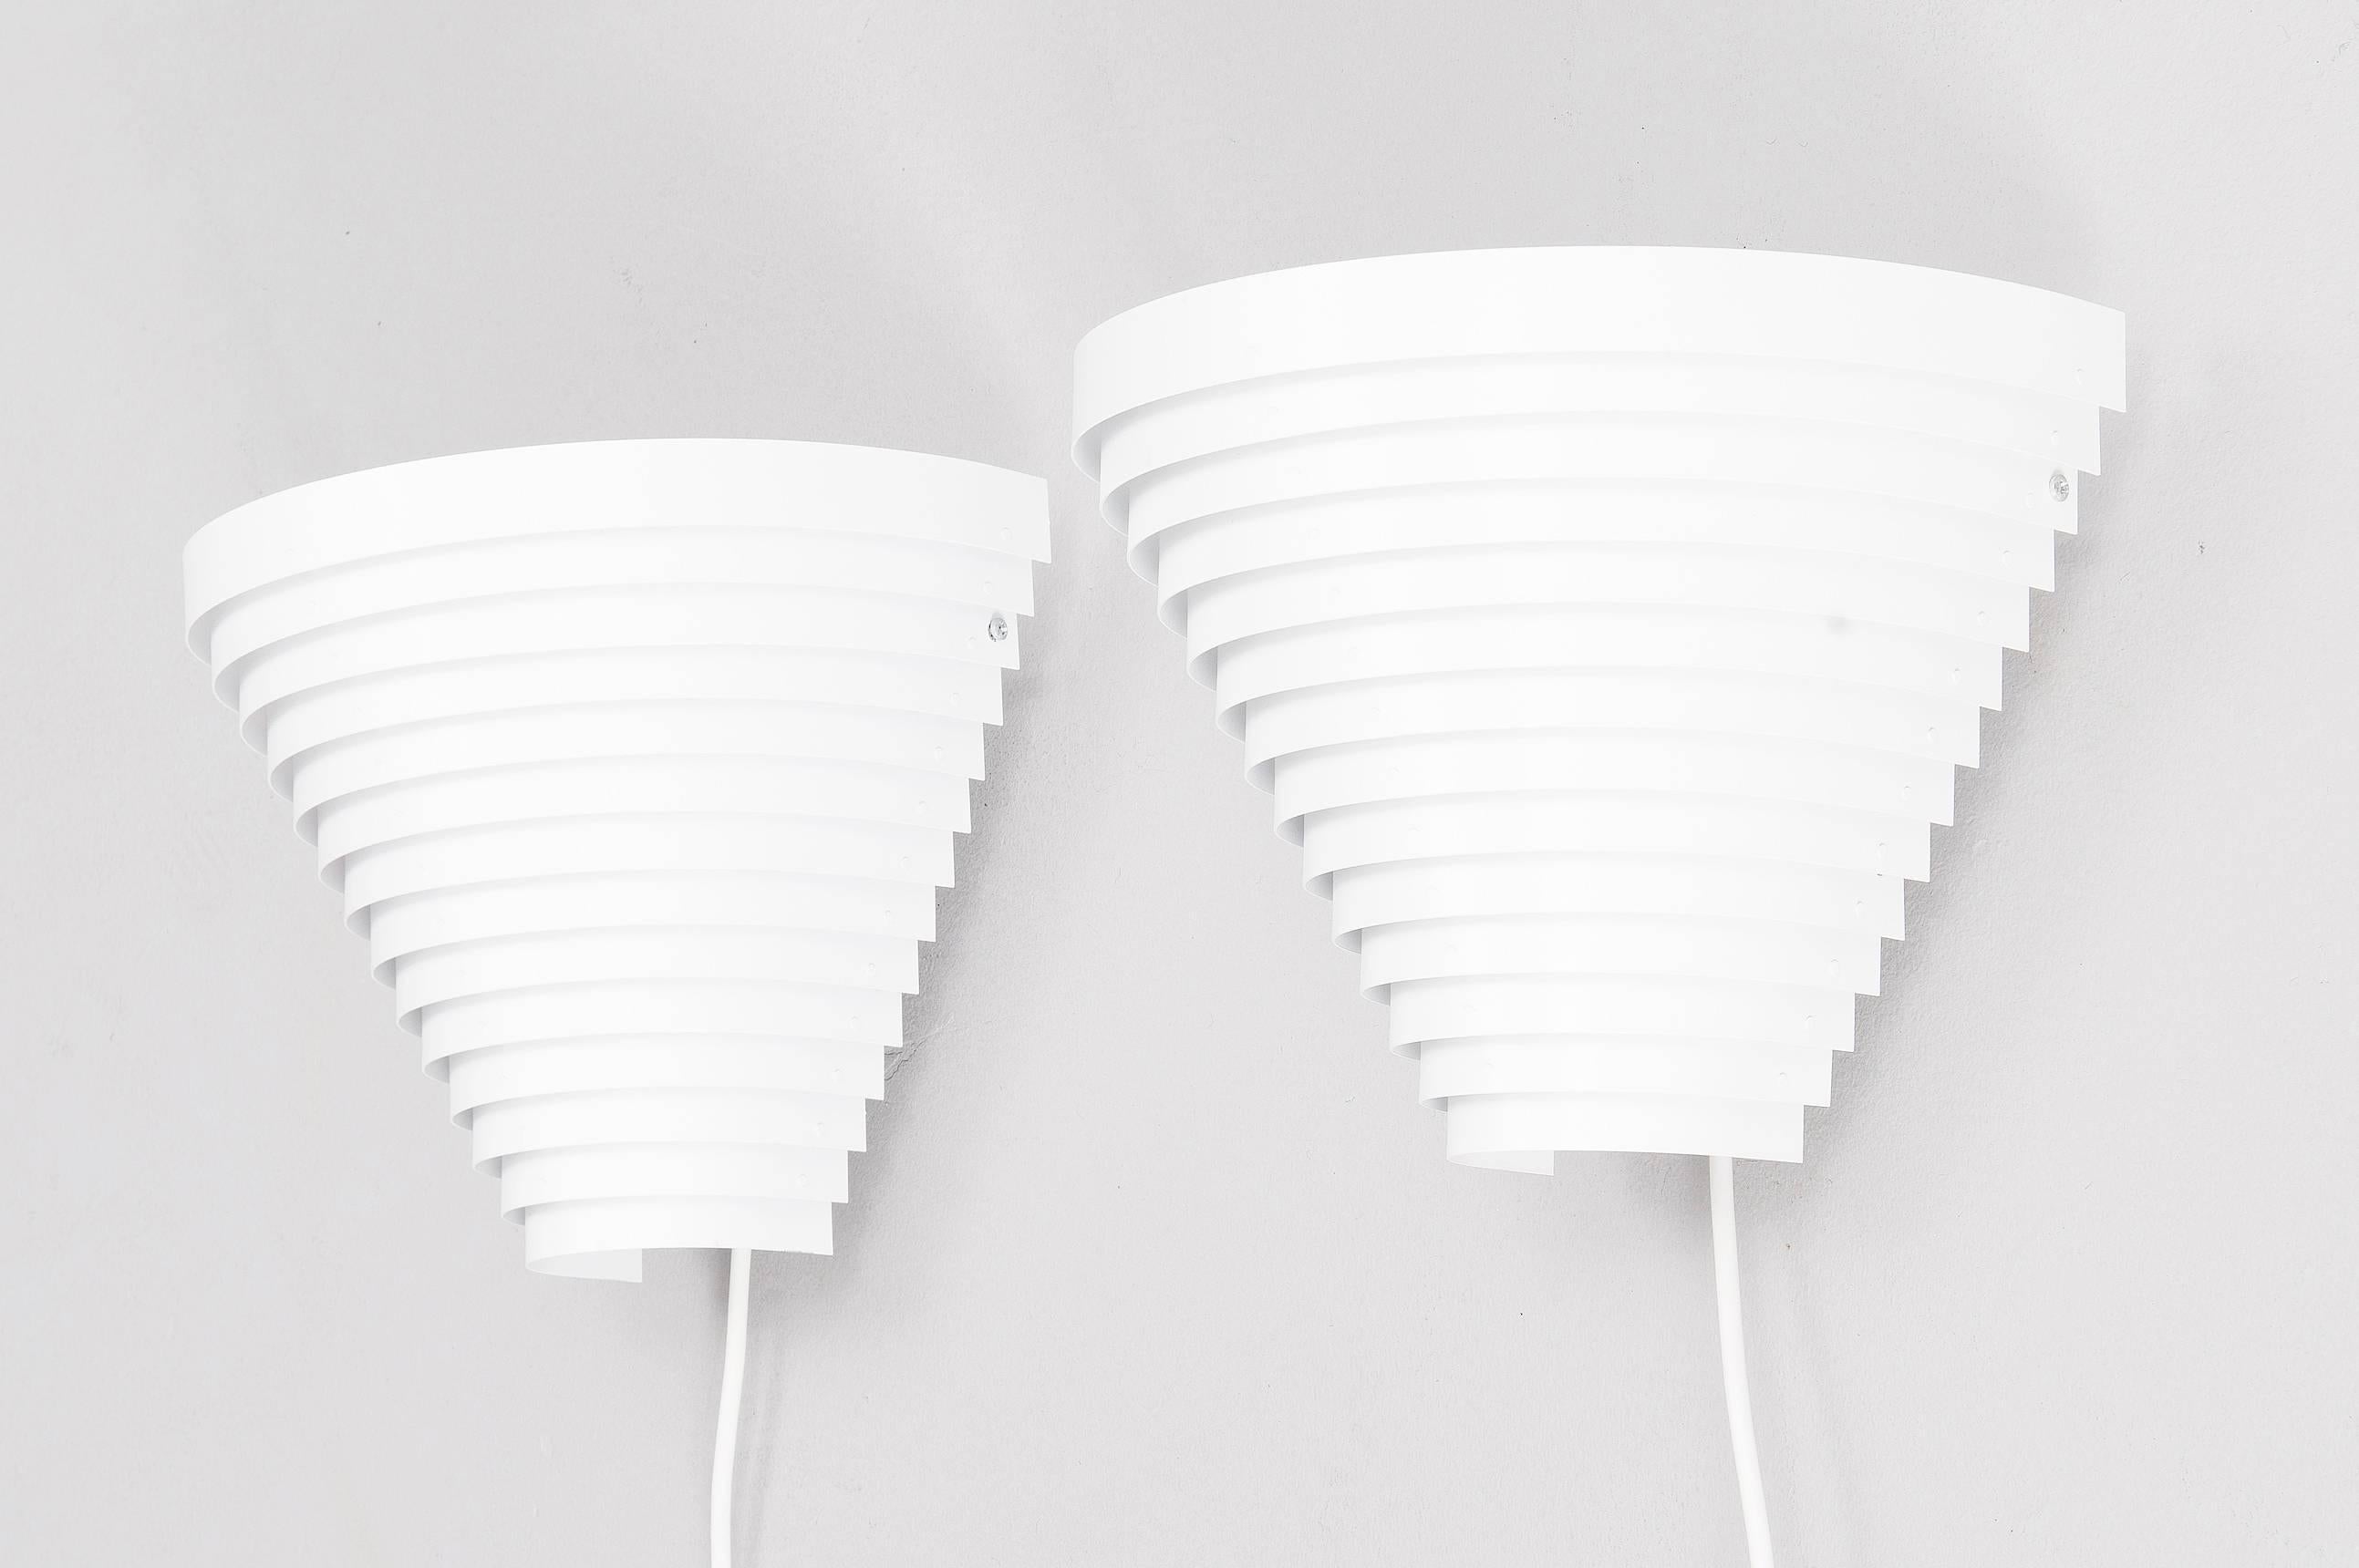 Pair of wall lamps, model “A 190”.
Manufactured by Artek,
Finland, 1956.
White painted metal.

